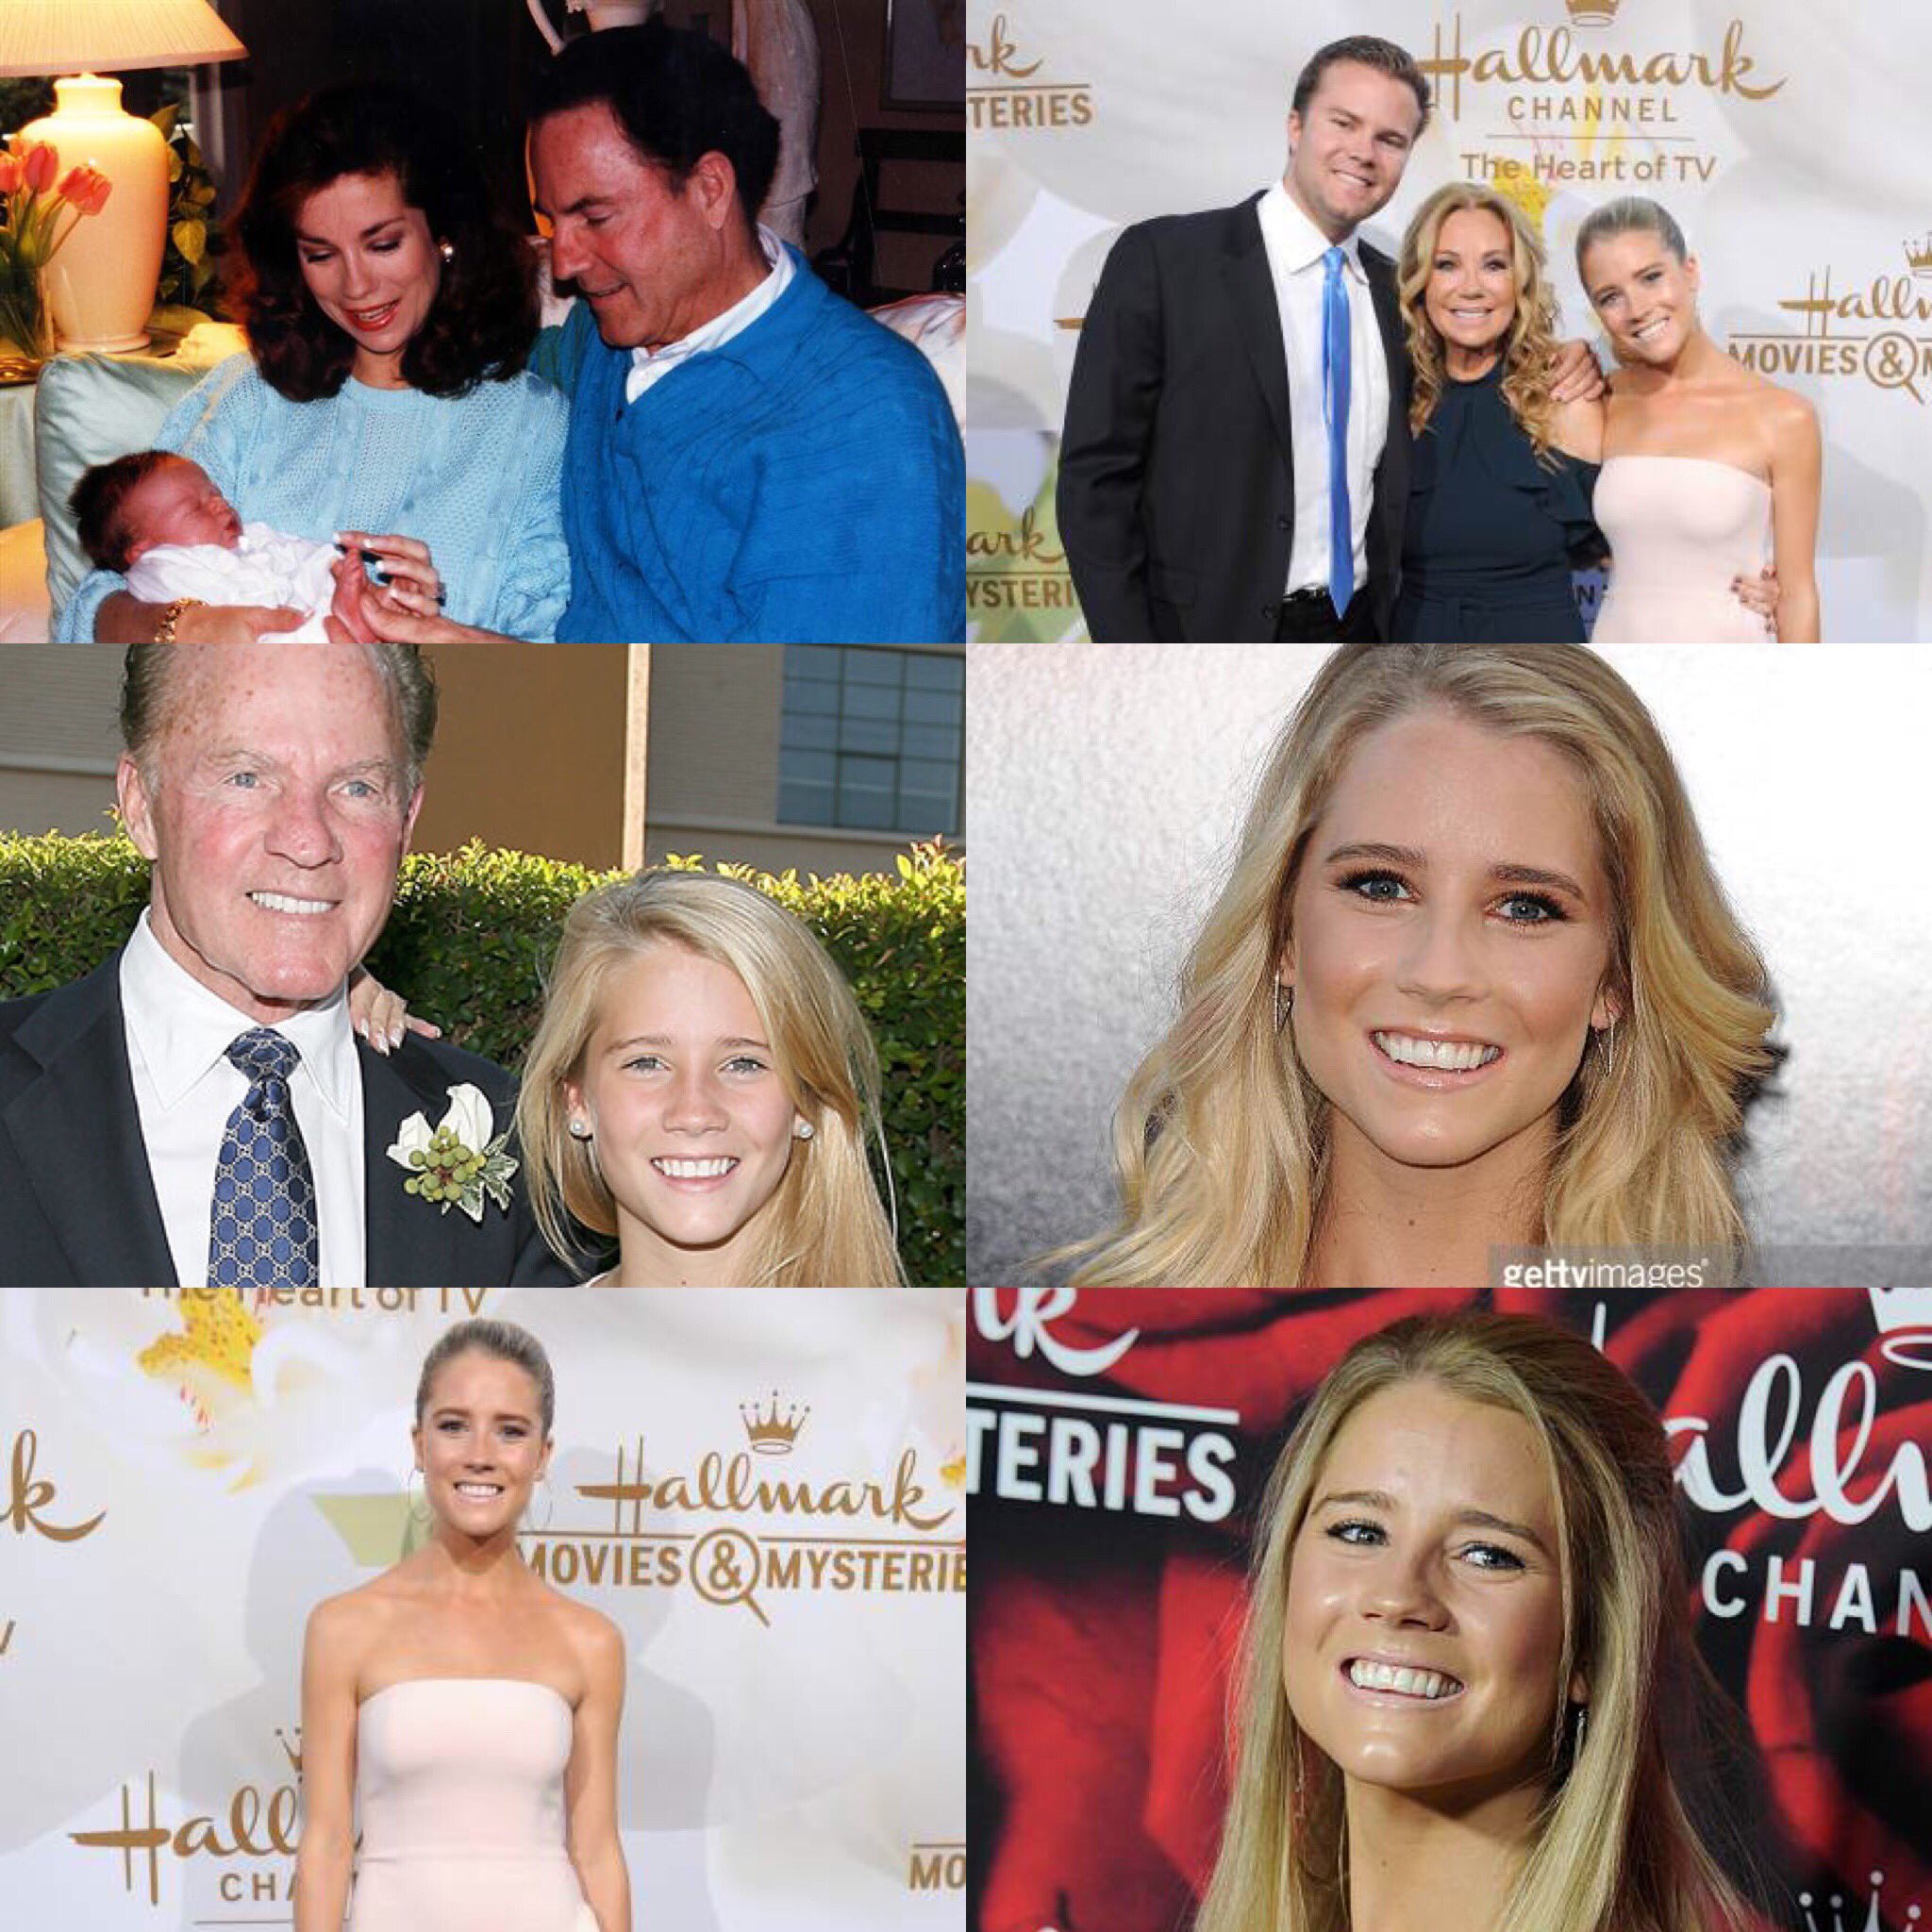 Happy 24 birthday to Cassidy gifford. Hope that she as a wonderful birthday. God bless.     